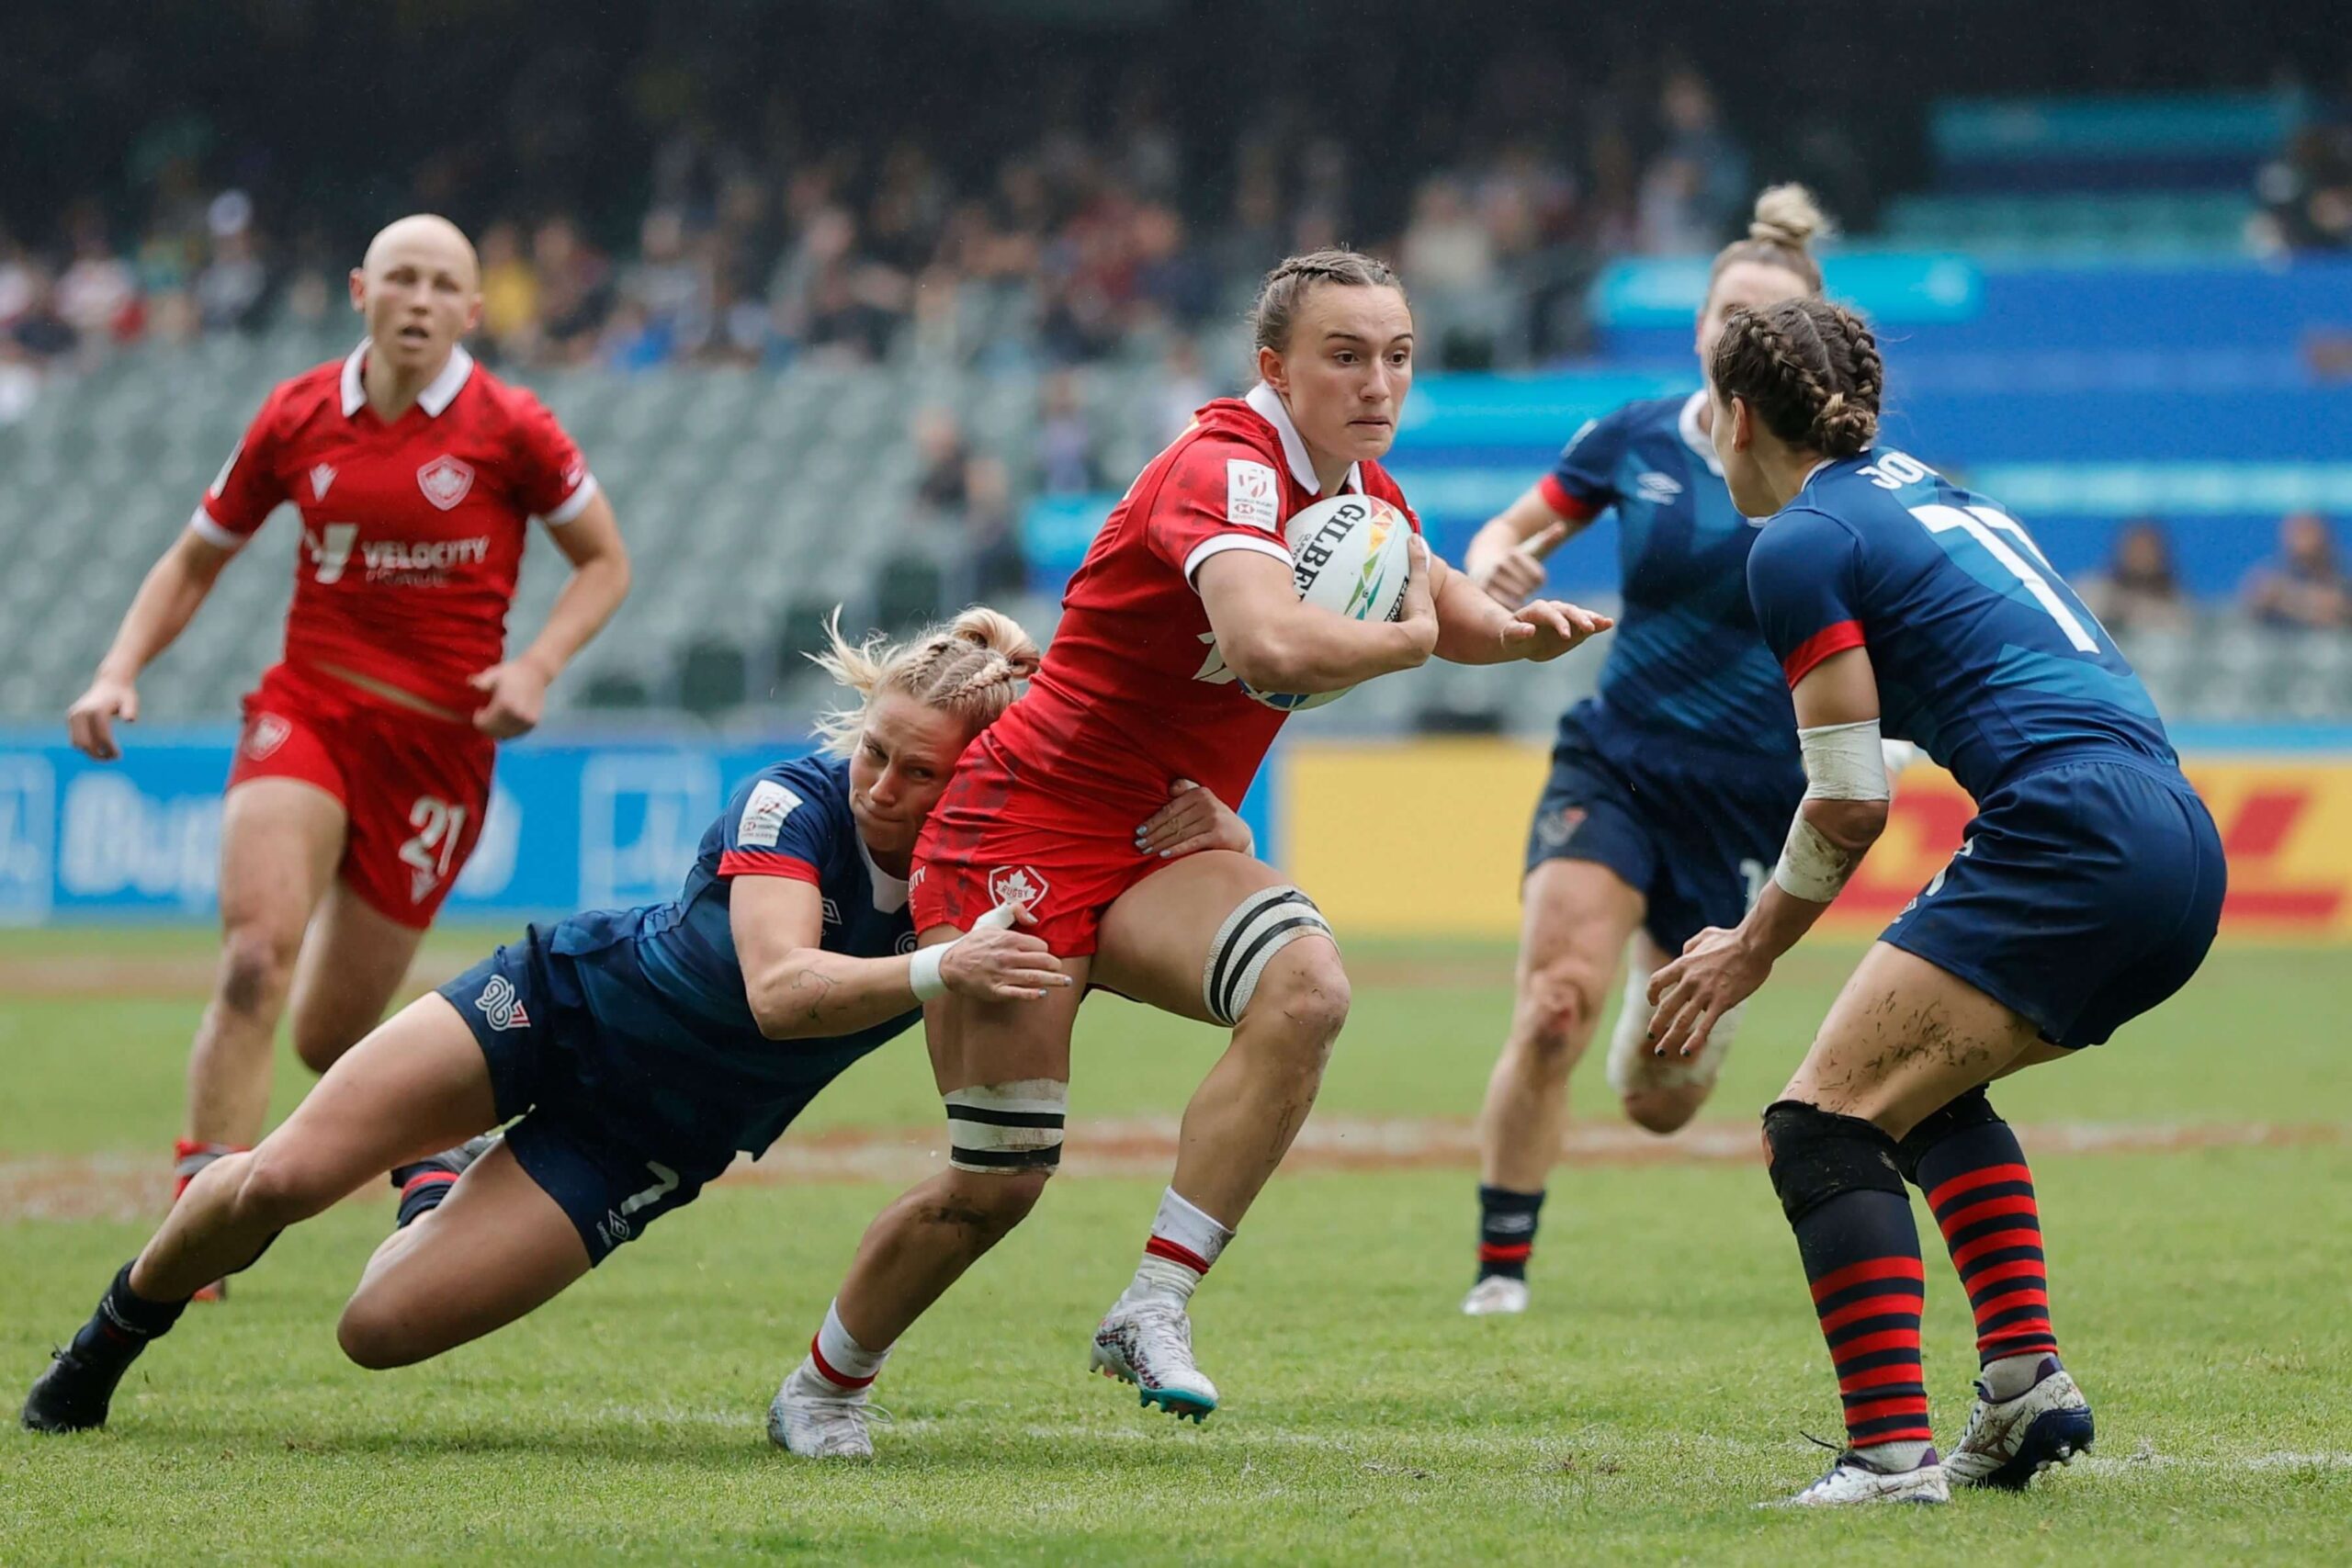 Canada's Krissy Scurfield charges through the Great Britain defense on day one of the Cathay/ HSBC Hong Kong Sevens at Hong Kong Stadium on 31 March, 2023 in Hong Kong, China.